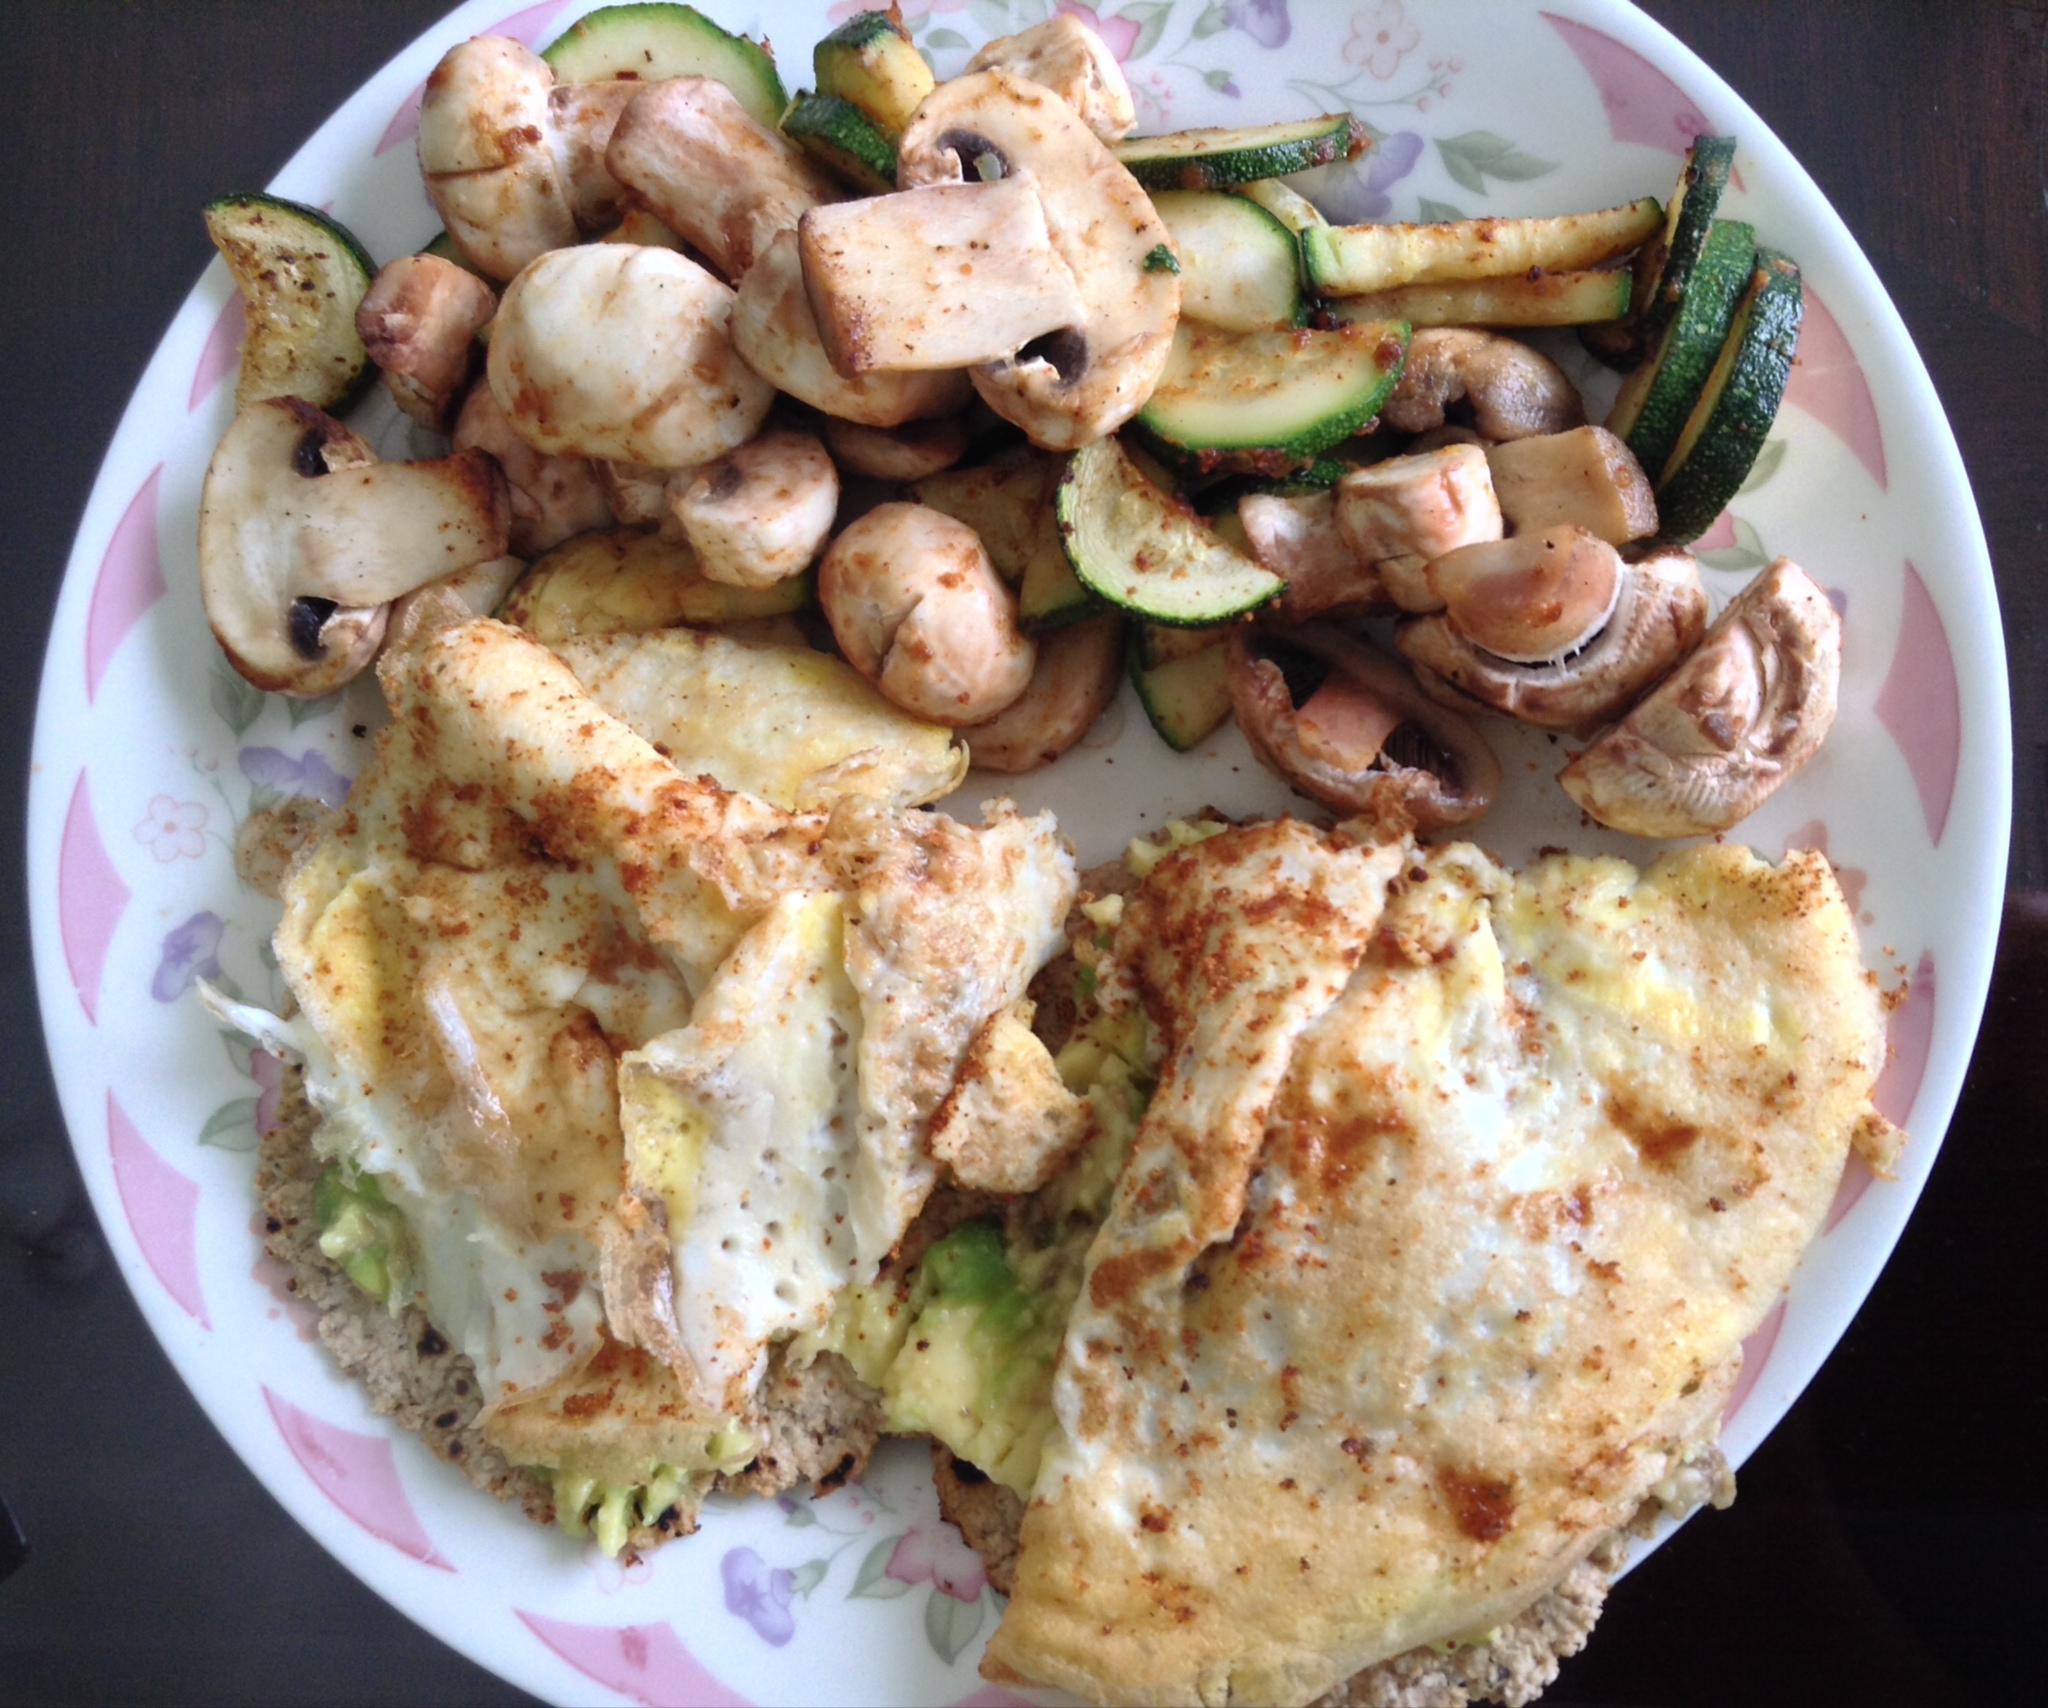 Yum lunch from last week: Homemade oatmeal wraps with avocado & eggs plus a side of mushrooms & zucchini